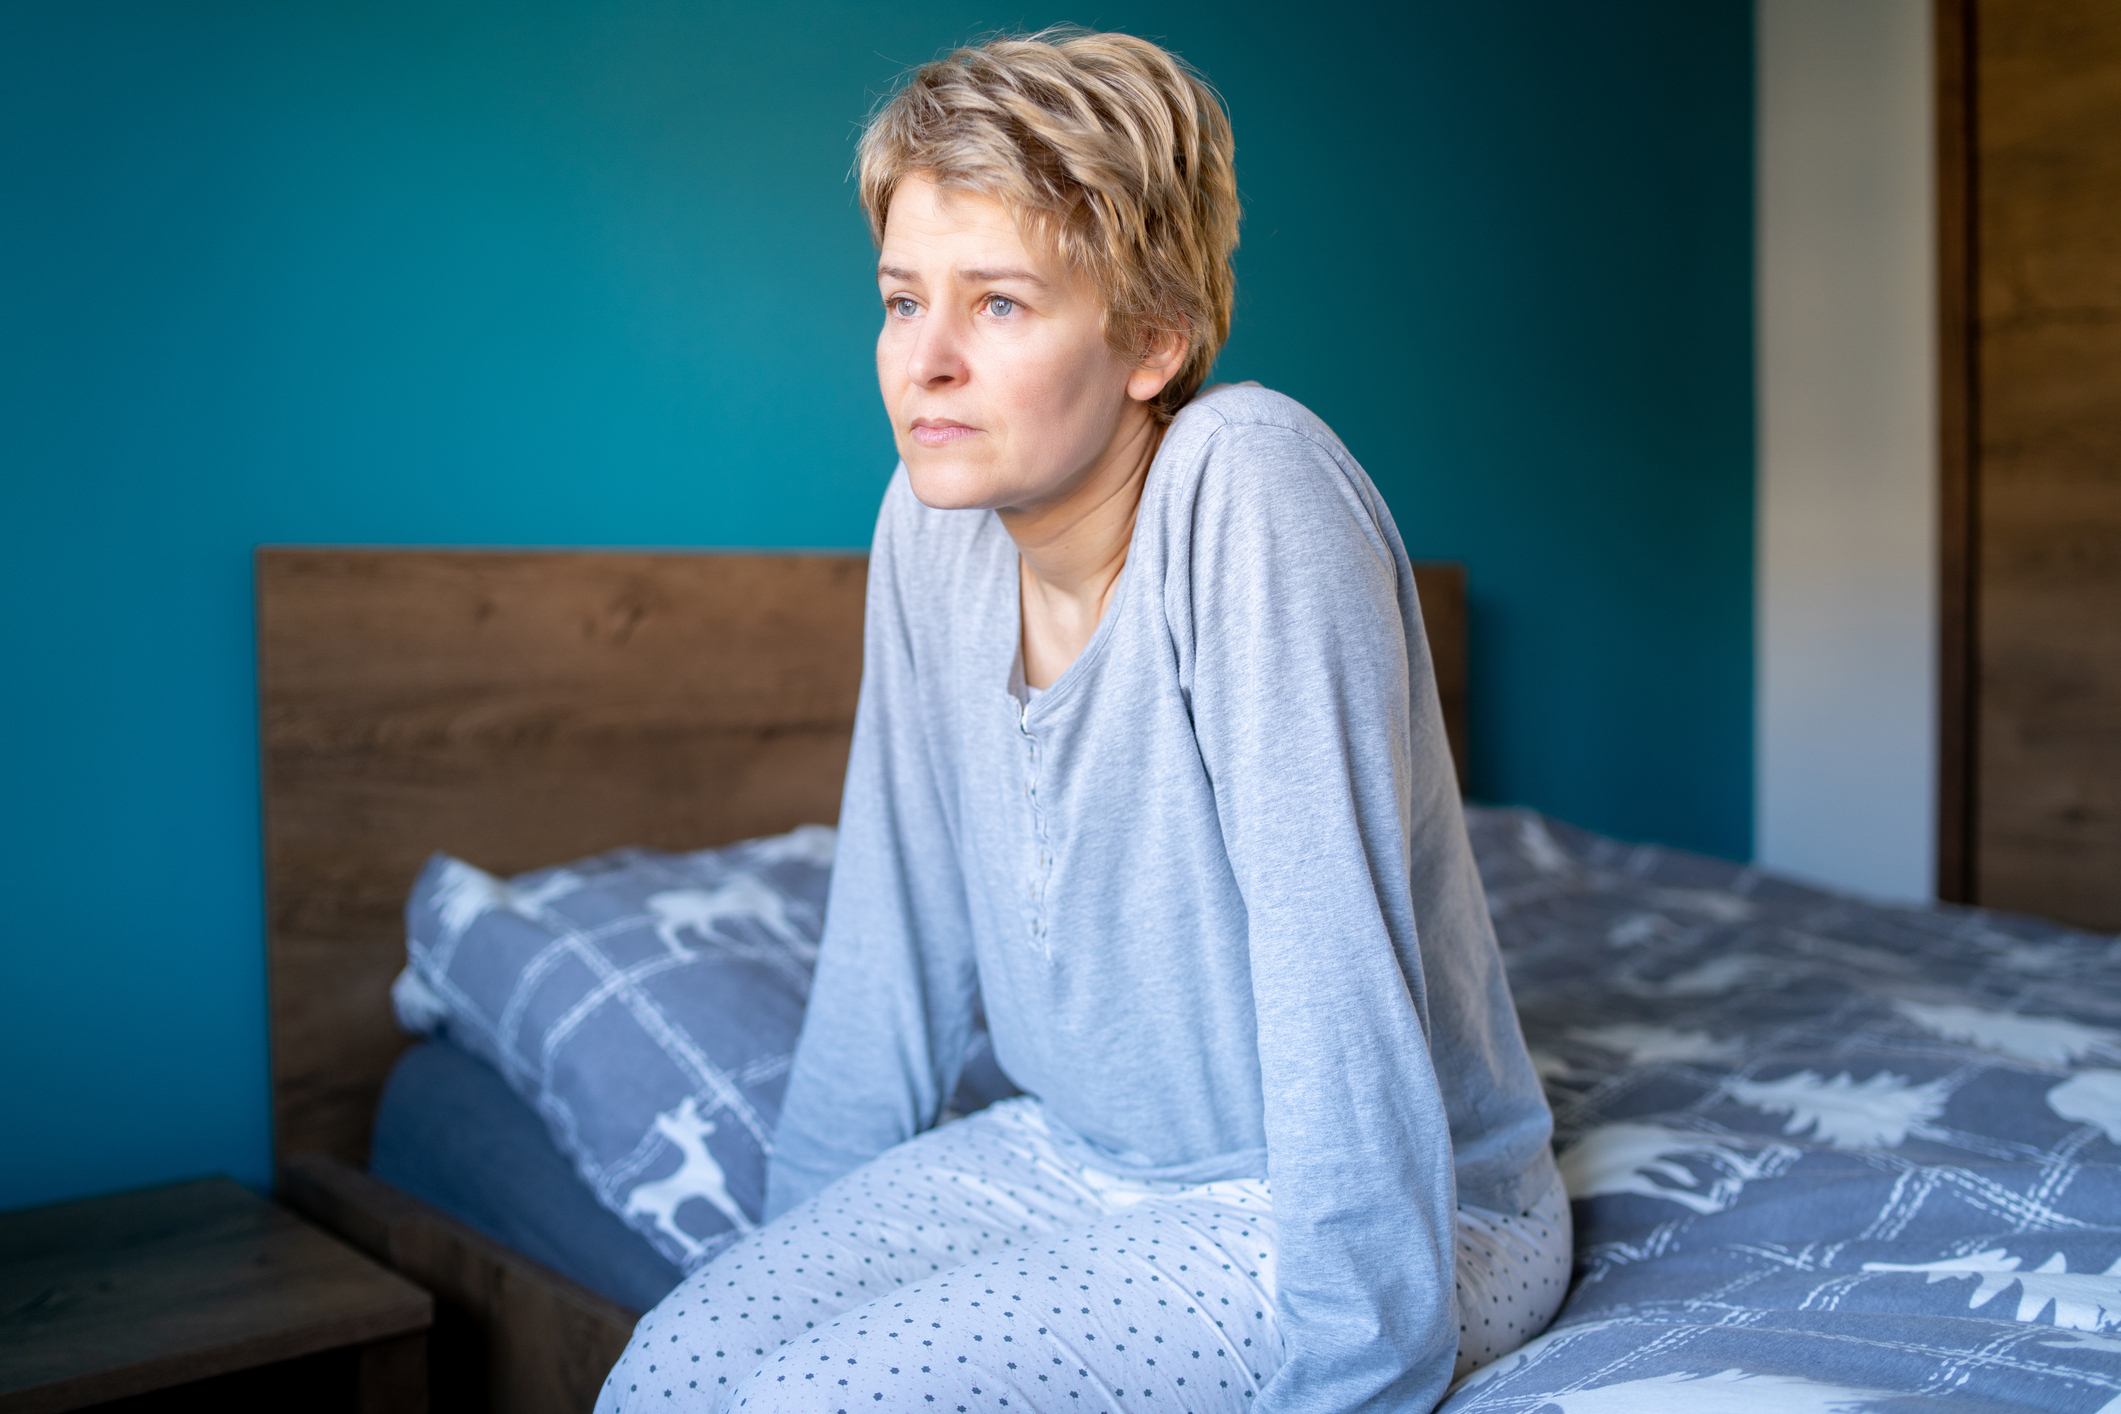 Person sitting on a bed looking contemplative, possibly reflecting on relationship issues